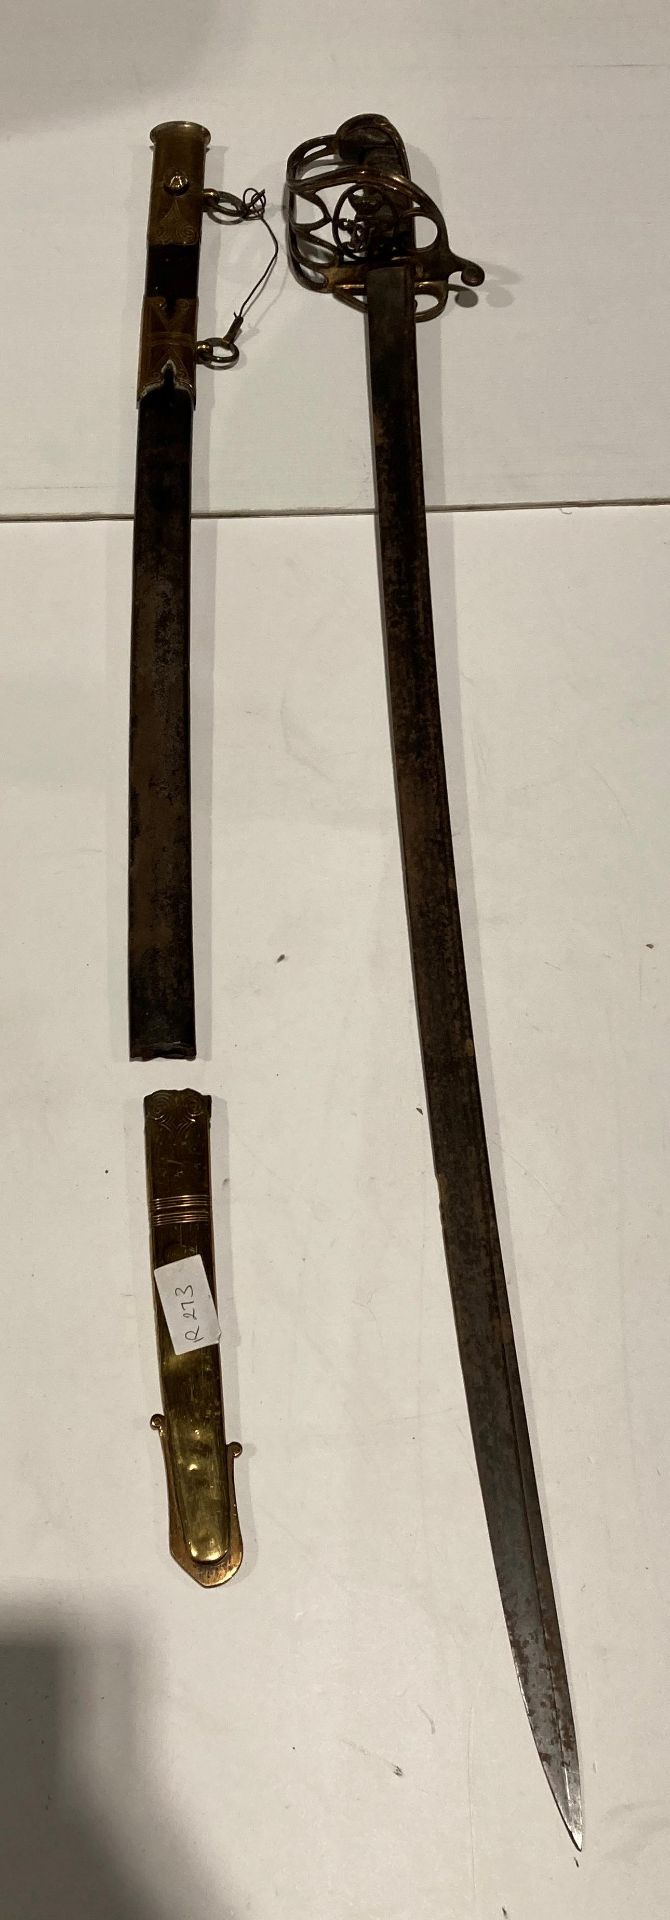 Early Queen Victoria military sabre sword, British pattern 1845 Gothic hilt sabre, - Image 2 of 8